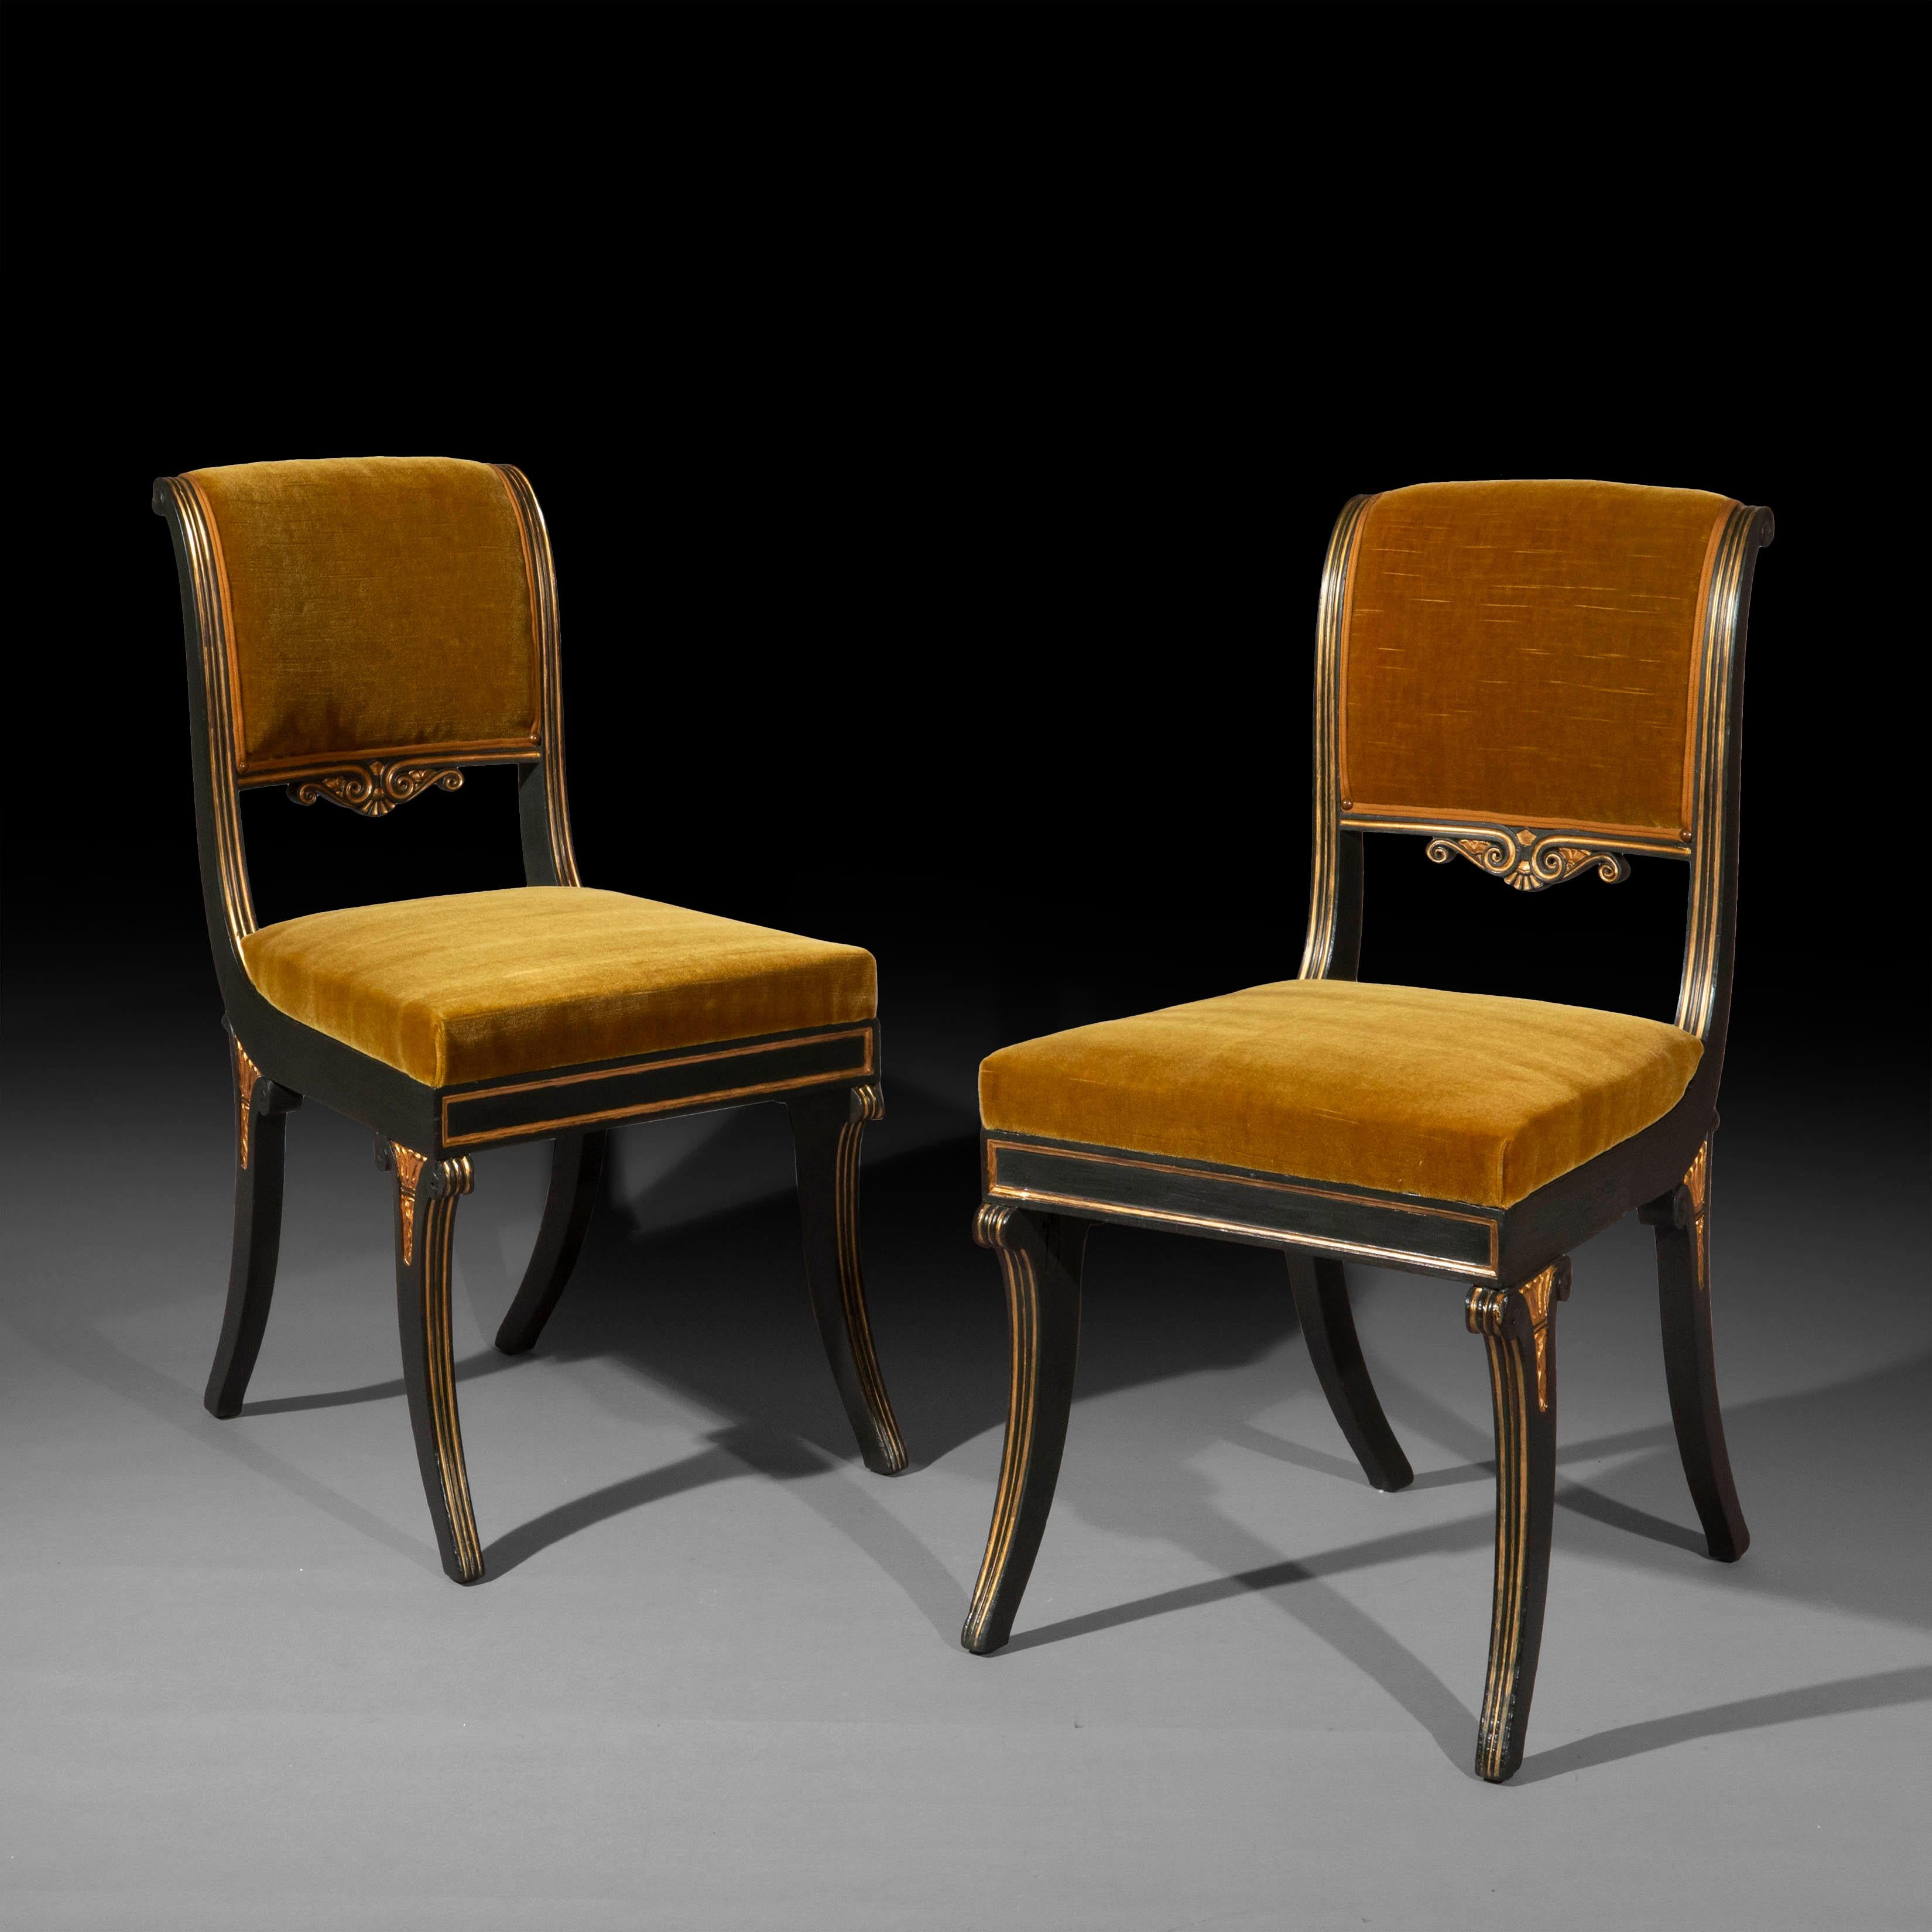 Pair of Regency Painted Klismos Chairs In Good Condition For Sale In Richmond, London